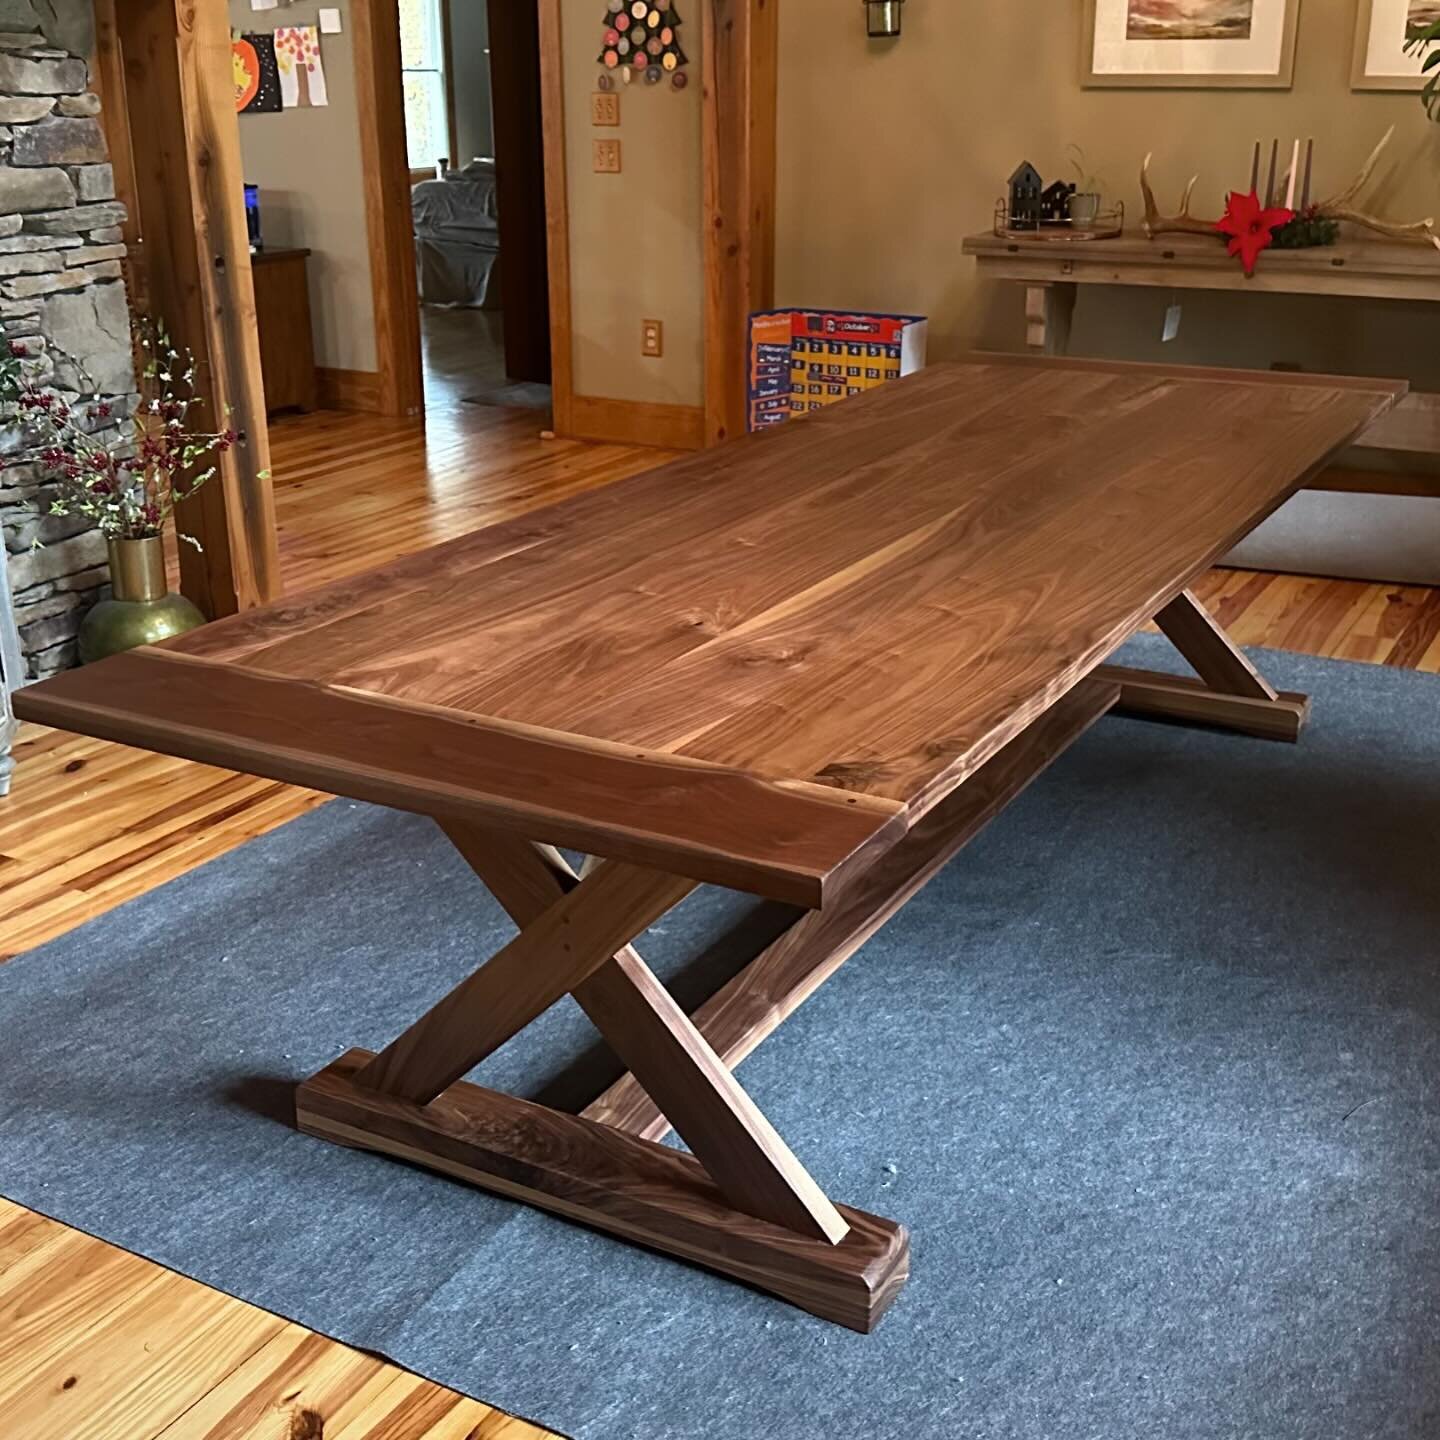 10&rsquo; walnut dining table with bread board ends. Walnut always has and will remain our favorite wood to build with until nature creates something more beautiful. If you&rsquo;re looking to change up your dining room, a beautiful custom table shou